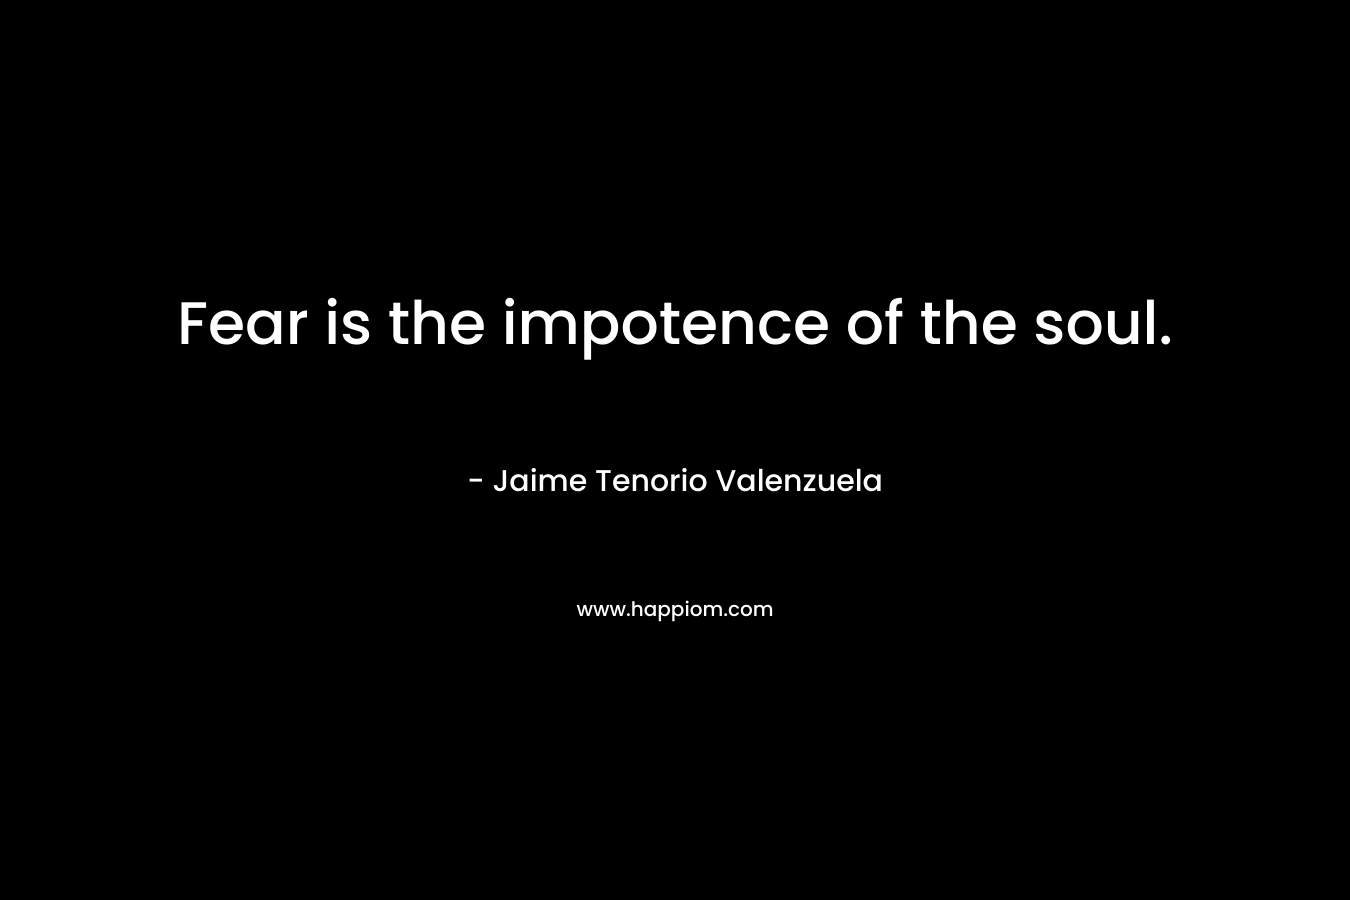 Fear is the impotence of the soul. – Jaime Tenorio Valenzuela